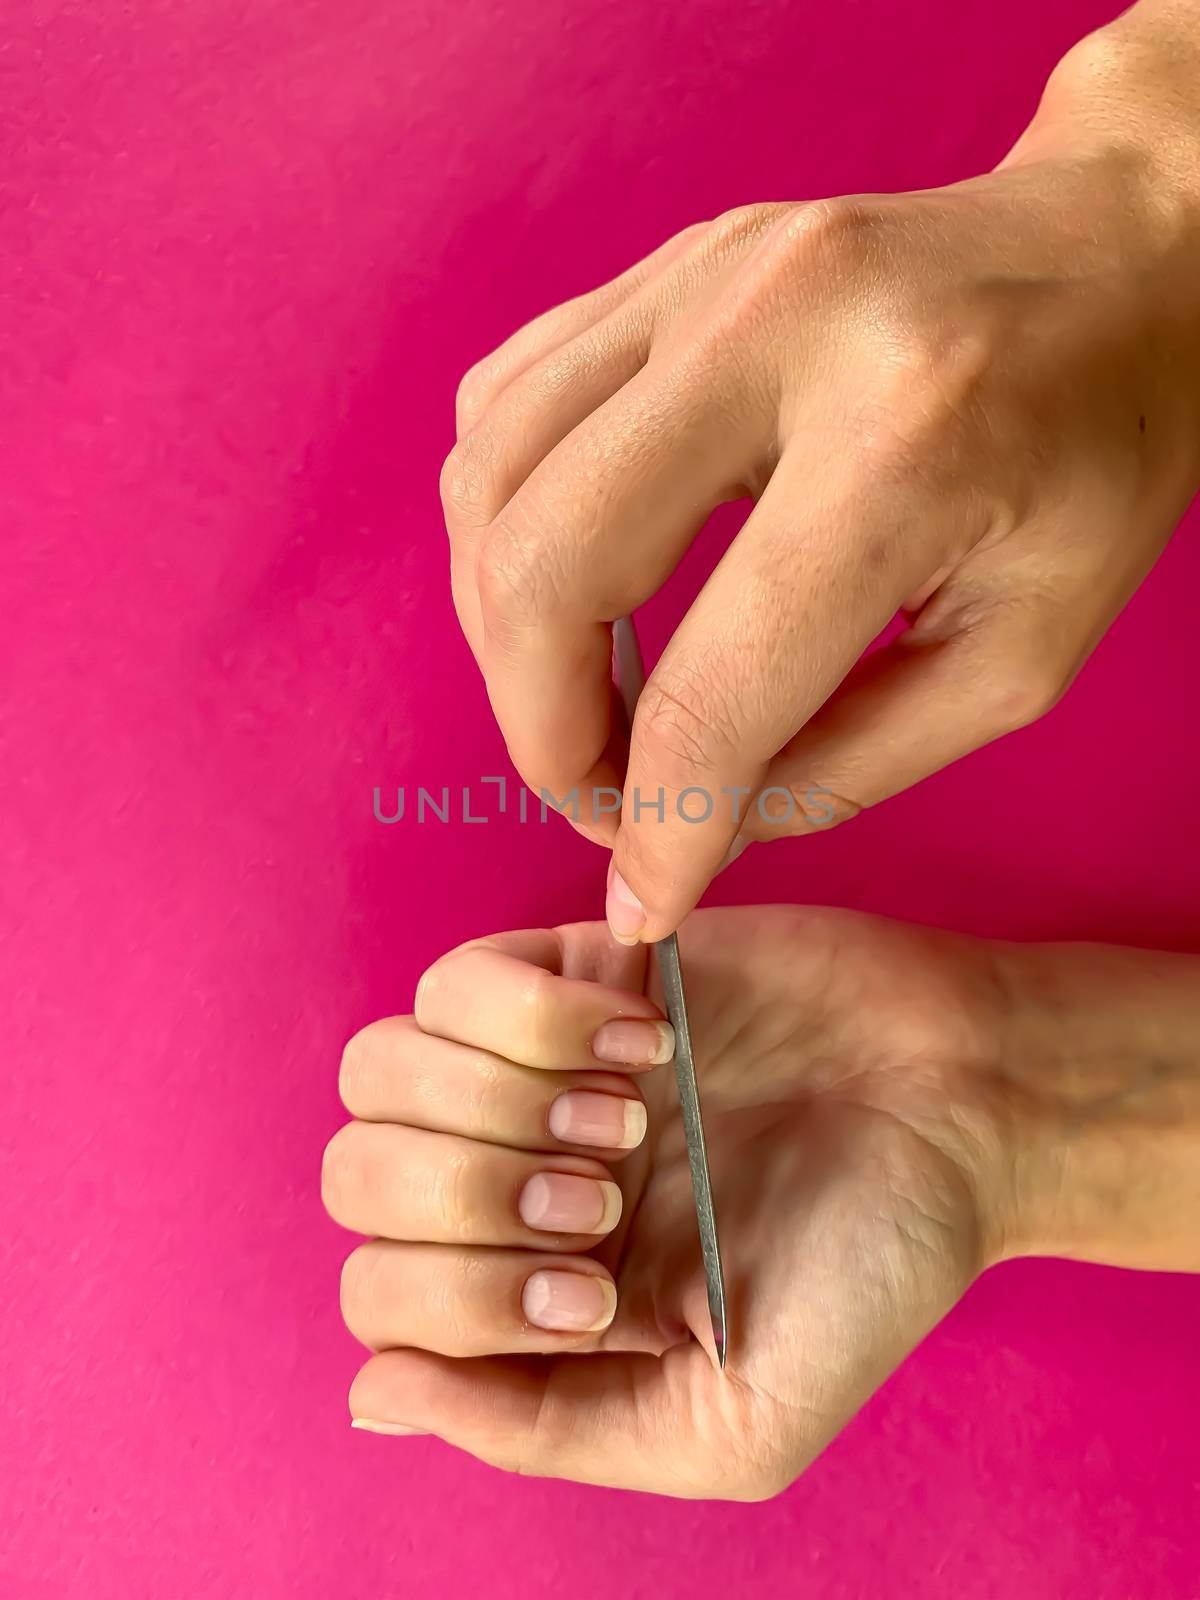 Woman's girl's hand filing nails with metal nail file on a pink background. Self manicure at home